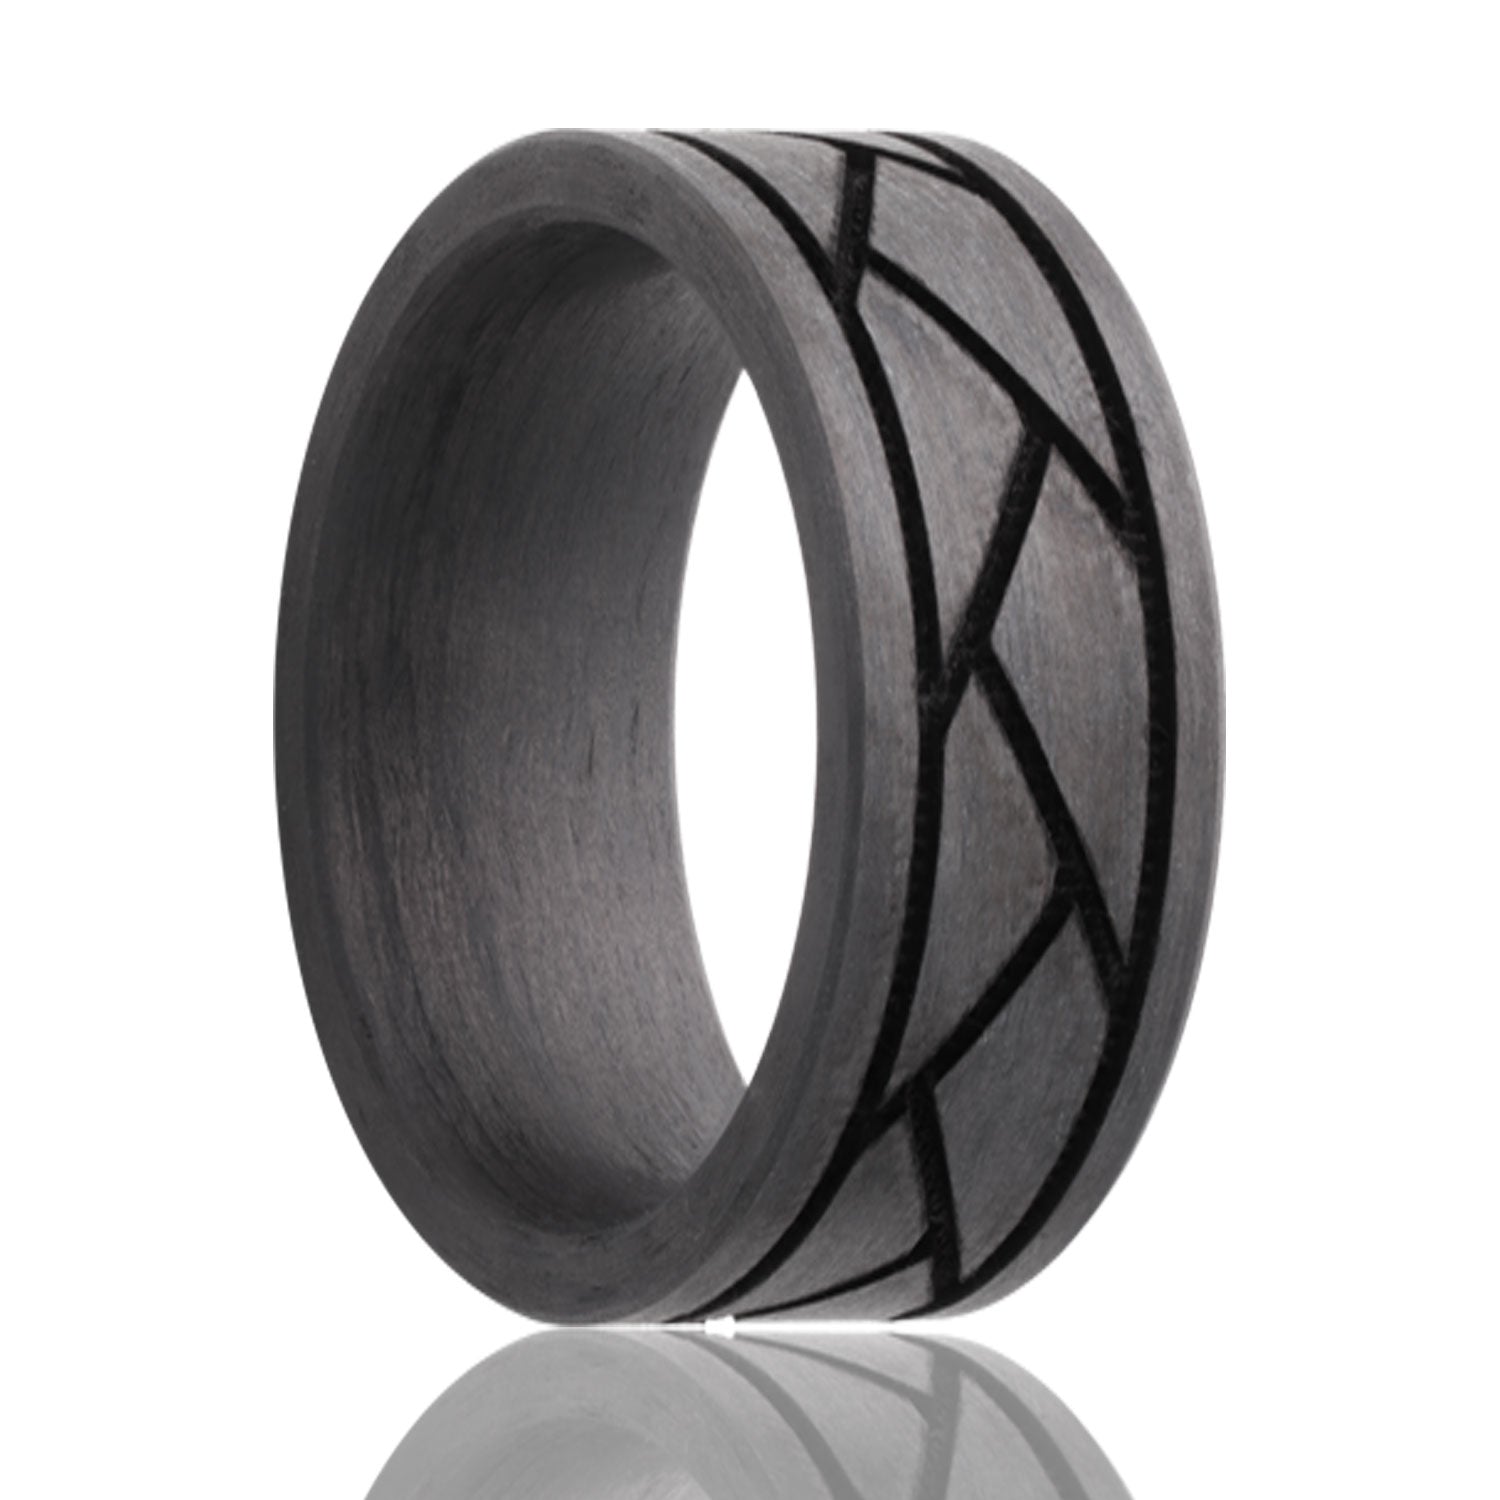 A triangle grid carbon fiber men's wedding band displayed on a neutral white background.